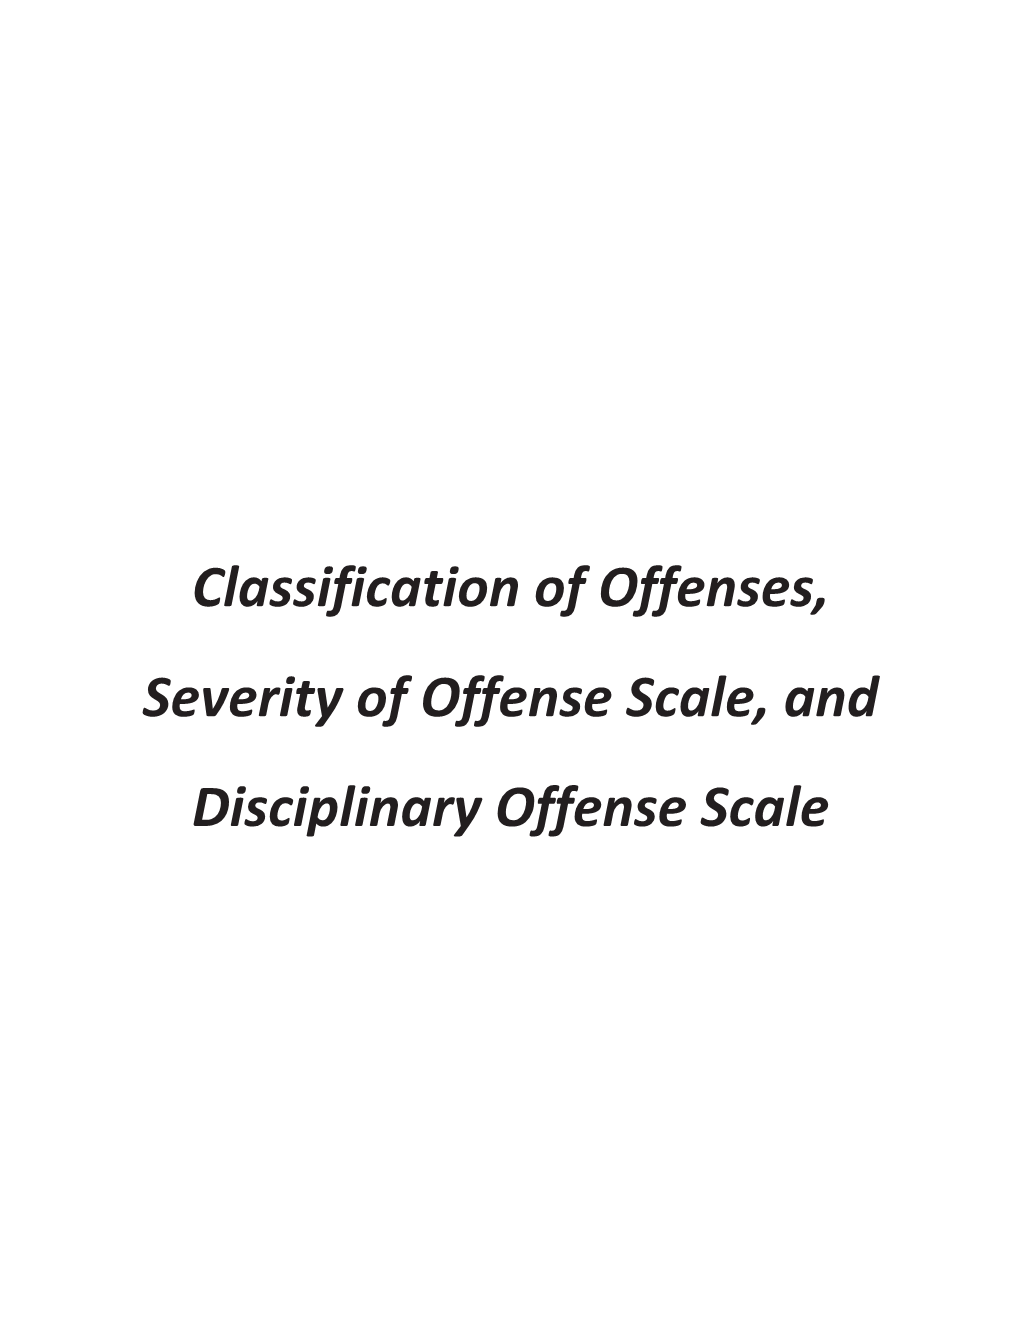 Classification of Offenses, Severity of Offense Scale, and Disciplinary Offense Scale